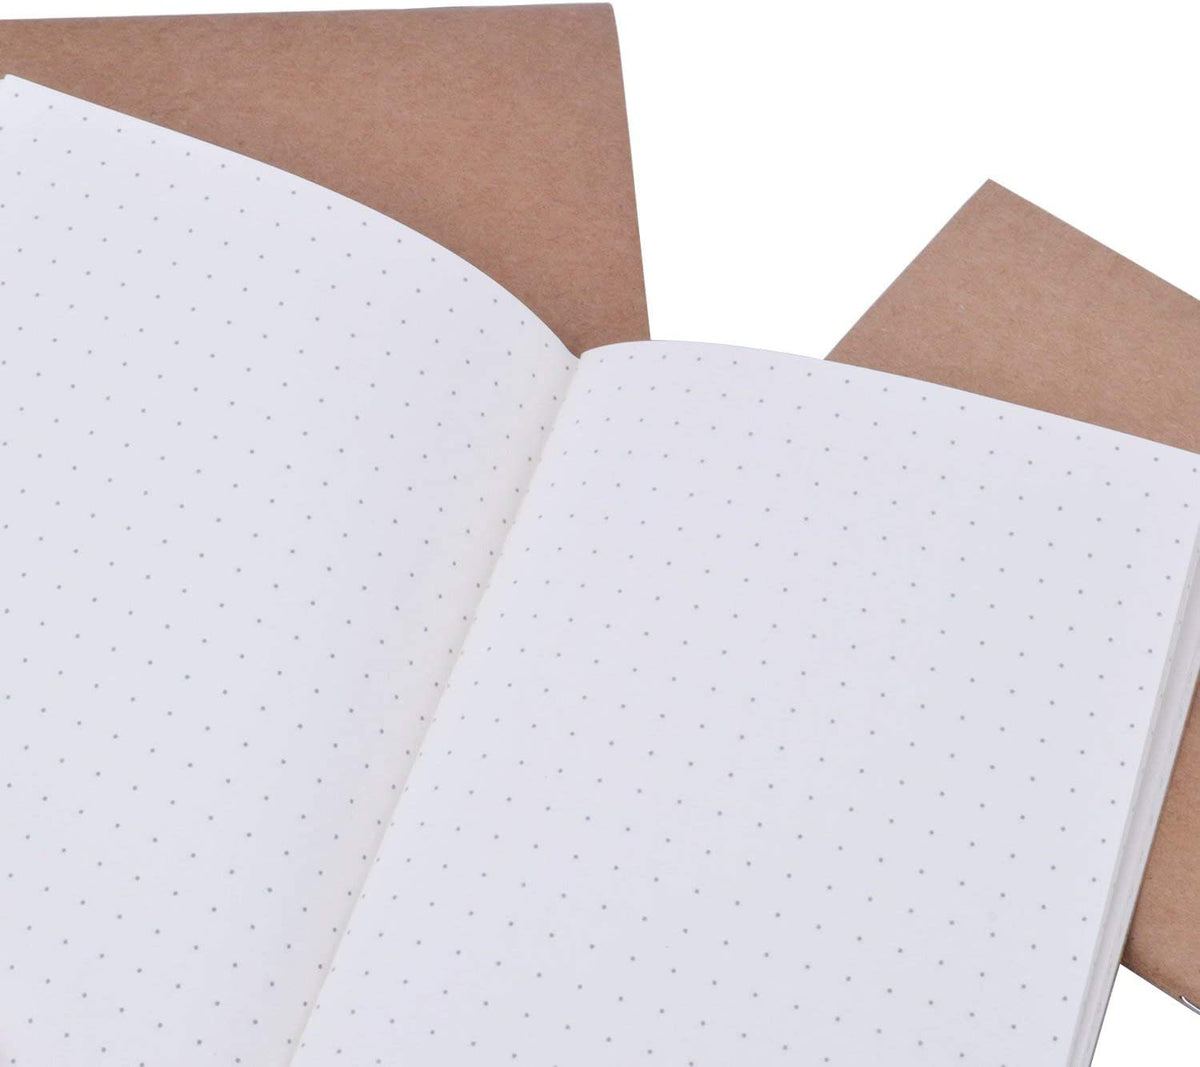 A5 Dotted Notebooks